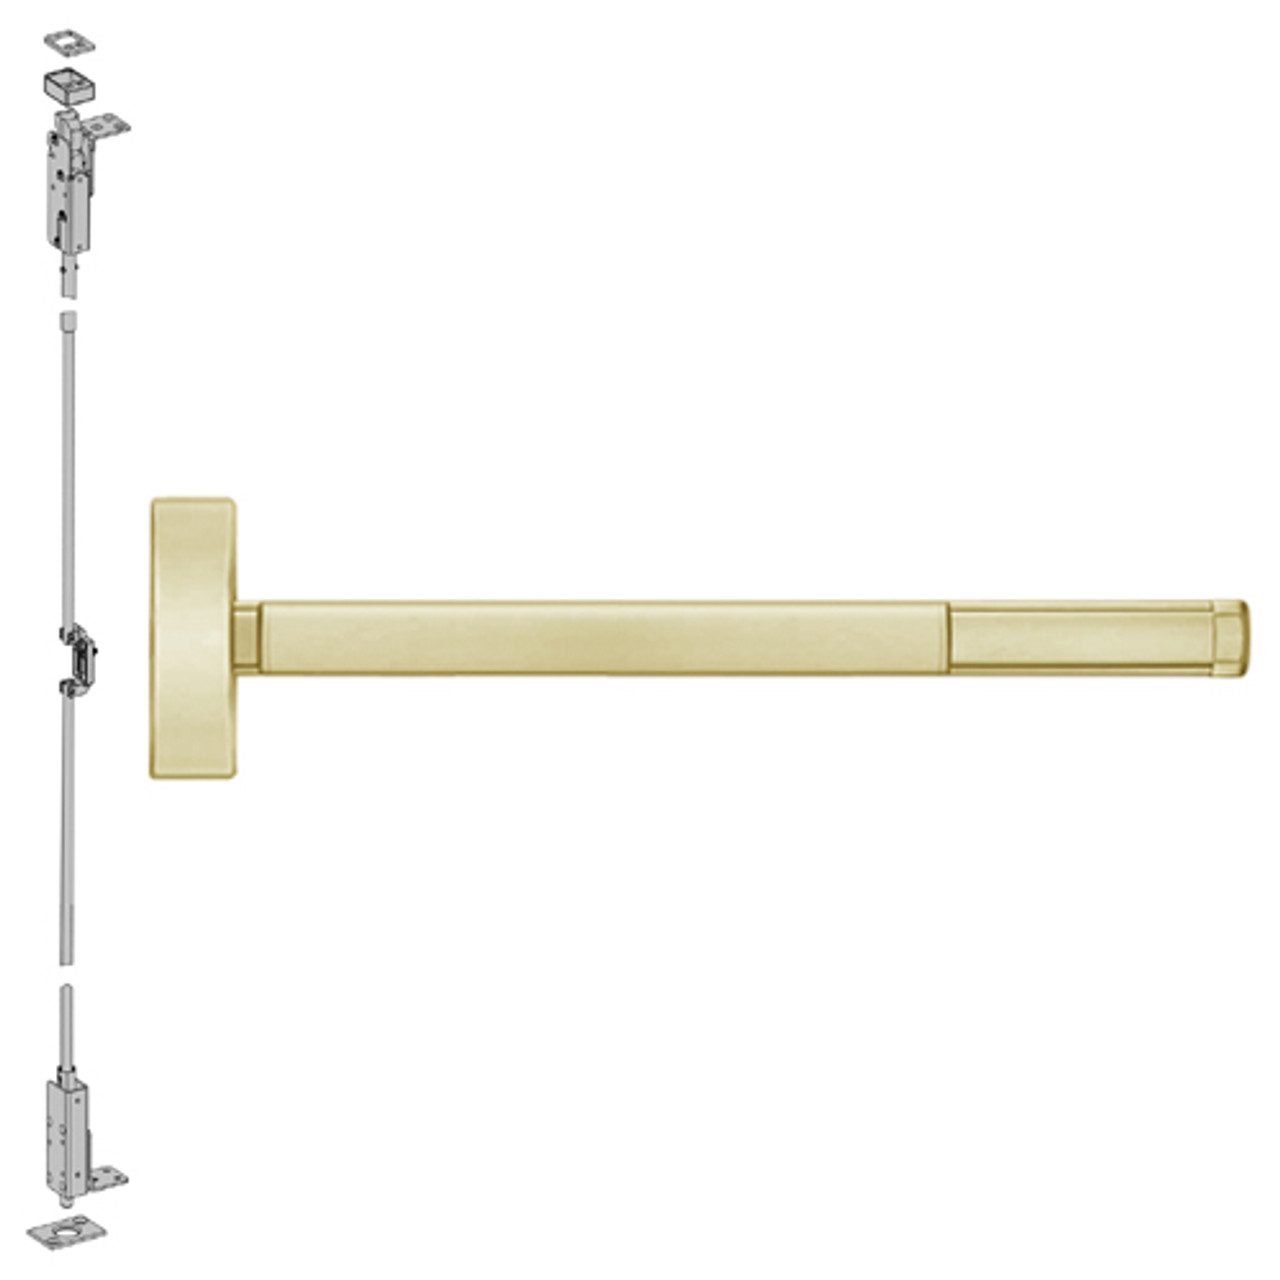 FL2708-606-36 PHI 2700 Series Fire Rated Wood Door Concealed Vertical Exit Device Prepped for Key Controls Lever-Knob in Satin Brass Finish